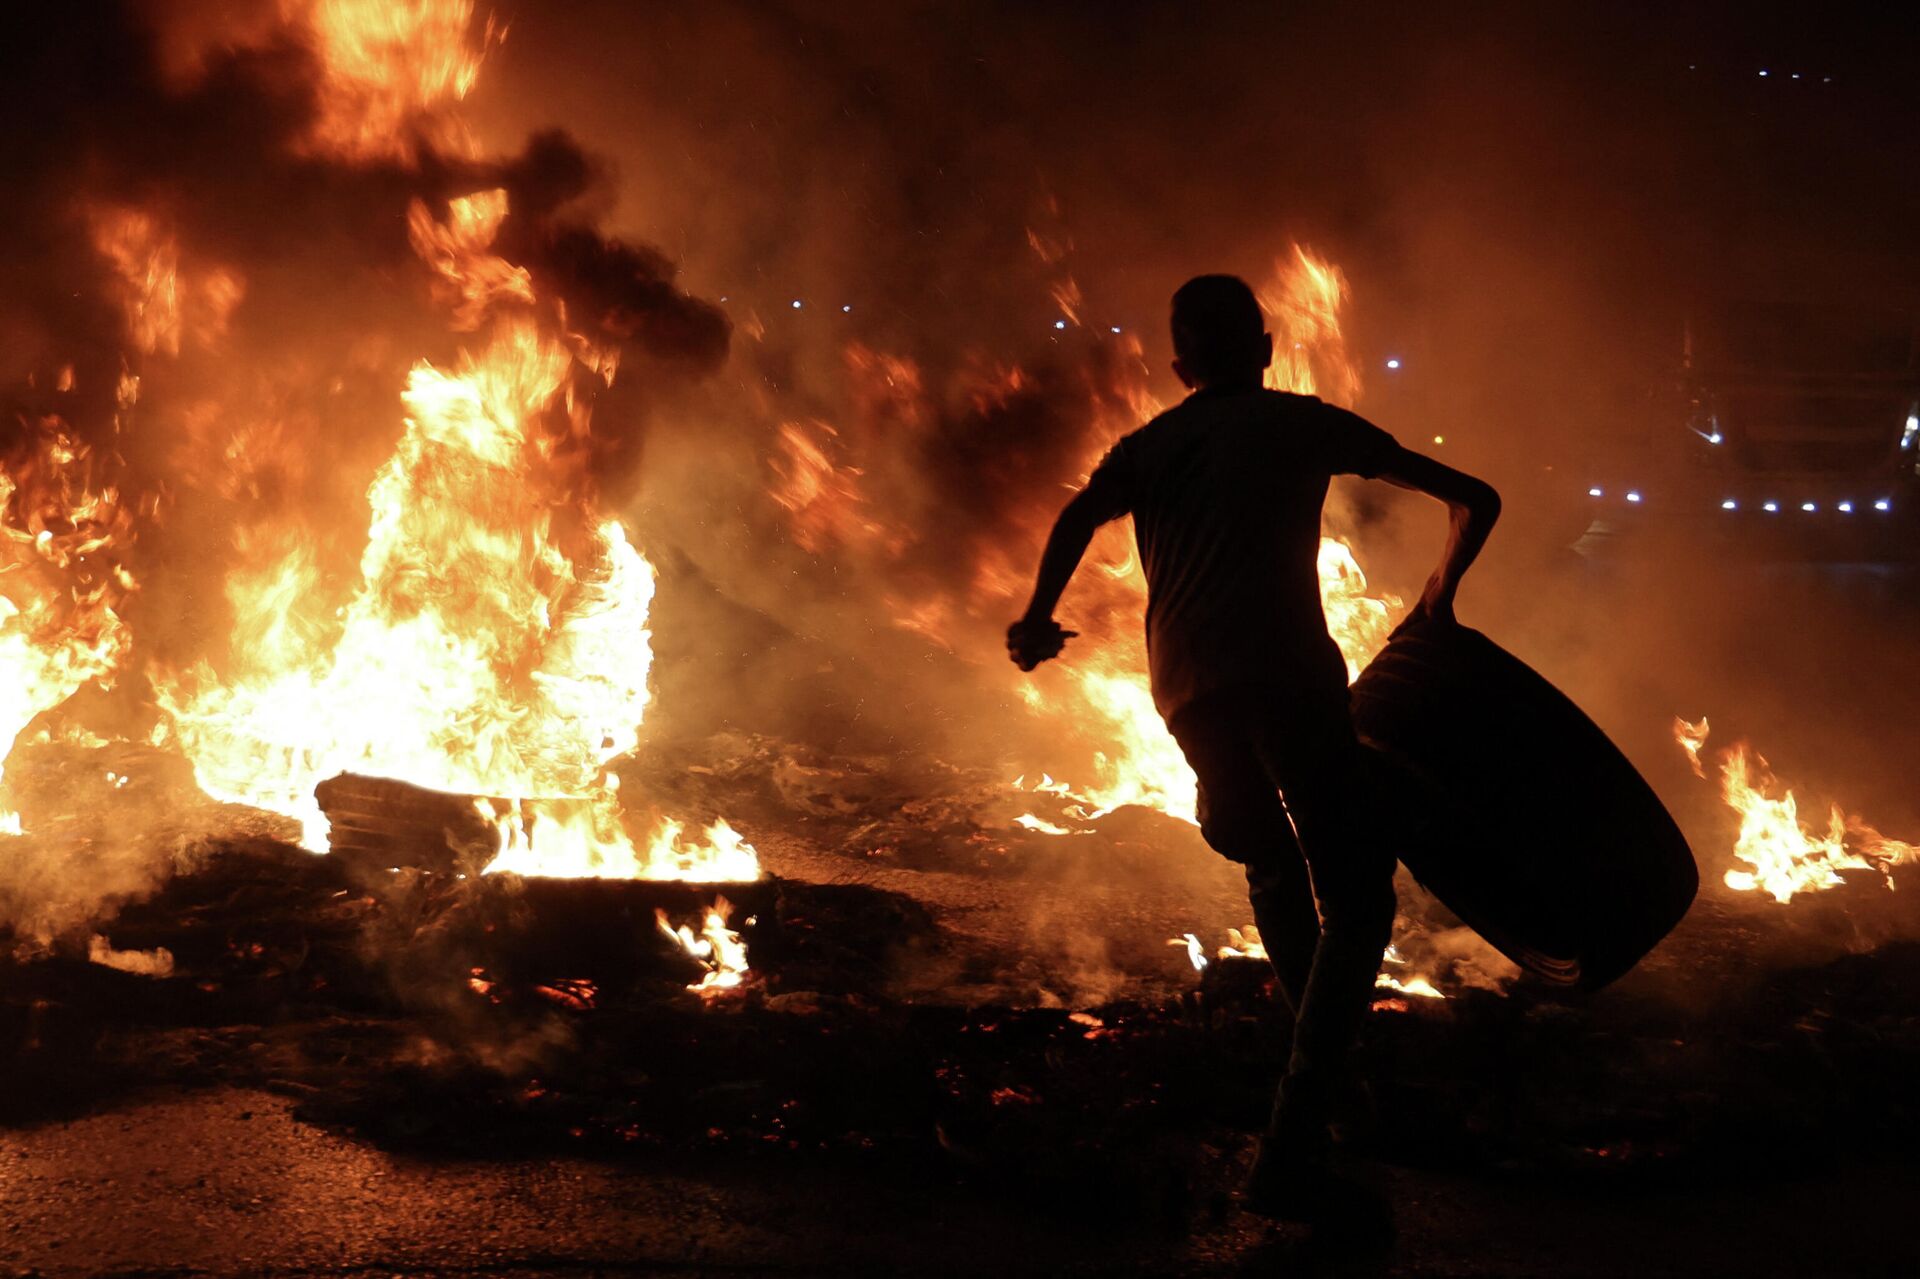 A Palestinian youth carries a tyre before setting it ablaze, during confrontations with Israeli security forces following a rally in support of Palestinian prisoners held in Israeli jails, at the Hawara checkpoint near the West Bank town of Nablus, on September 8, 2021. - Sputnik International, 1920, 23.06.2022